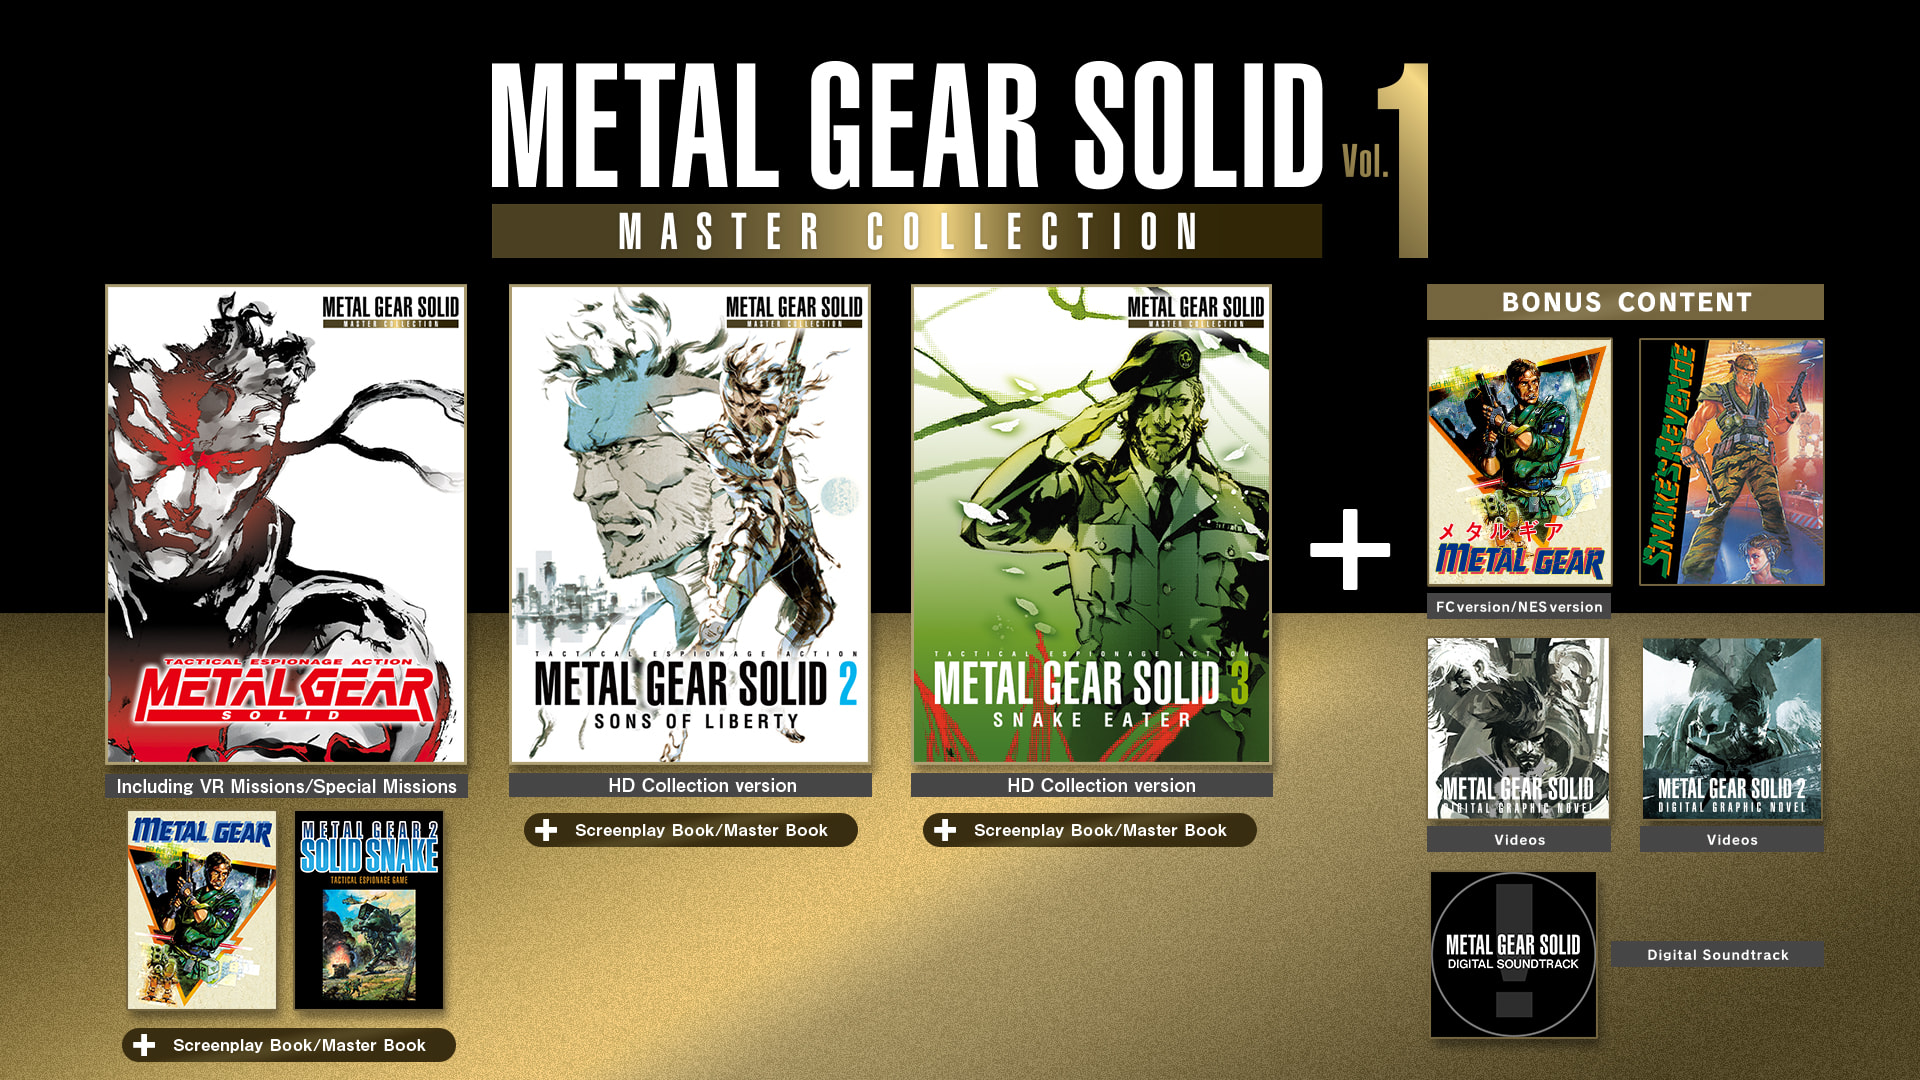 METAL GEAR SOLID: MASTER COLLECTION Vol. 1 for Nintendo Switch 